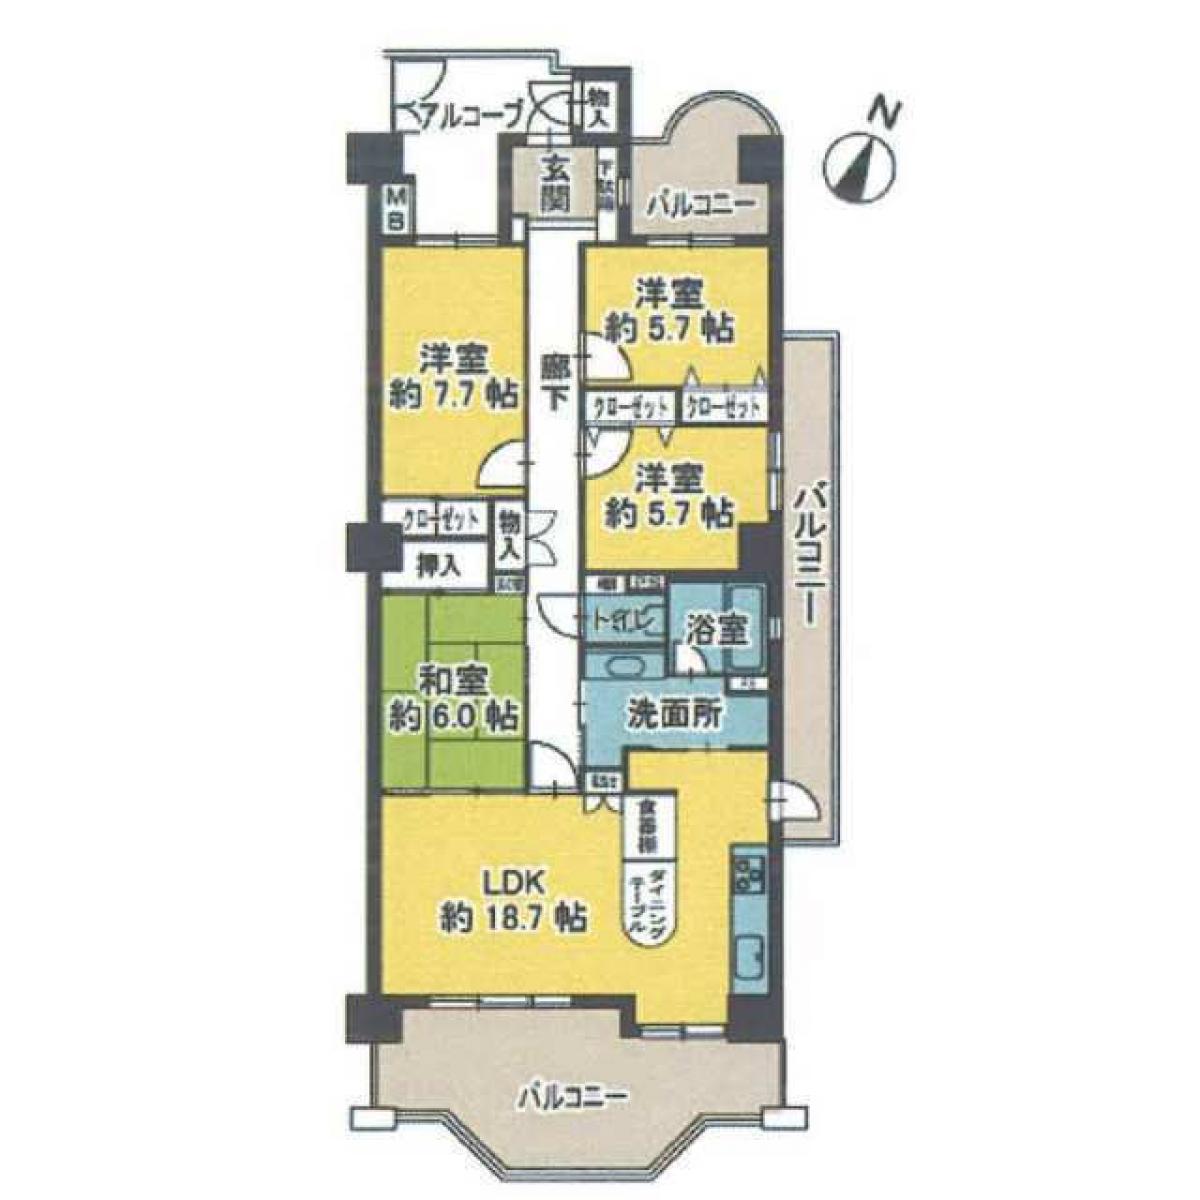 Picture of Apartment For Sale in Kasugai Shi, Aichi, Japan